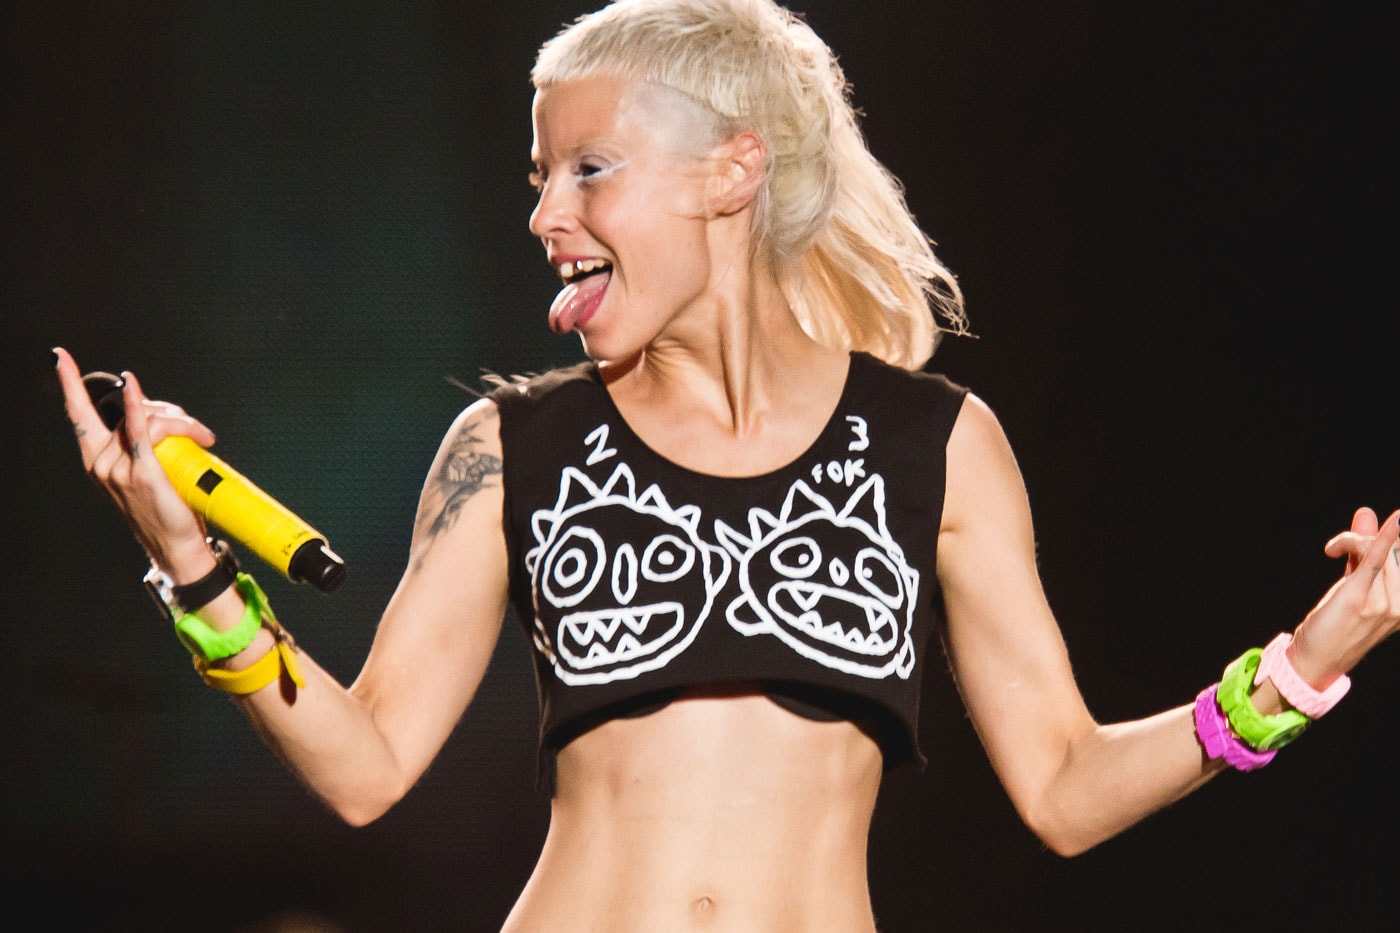 Watch Die Antwoord's "FAT FADED F*CK FACE" Video NSFW